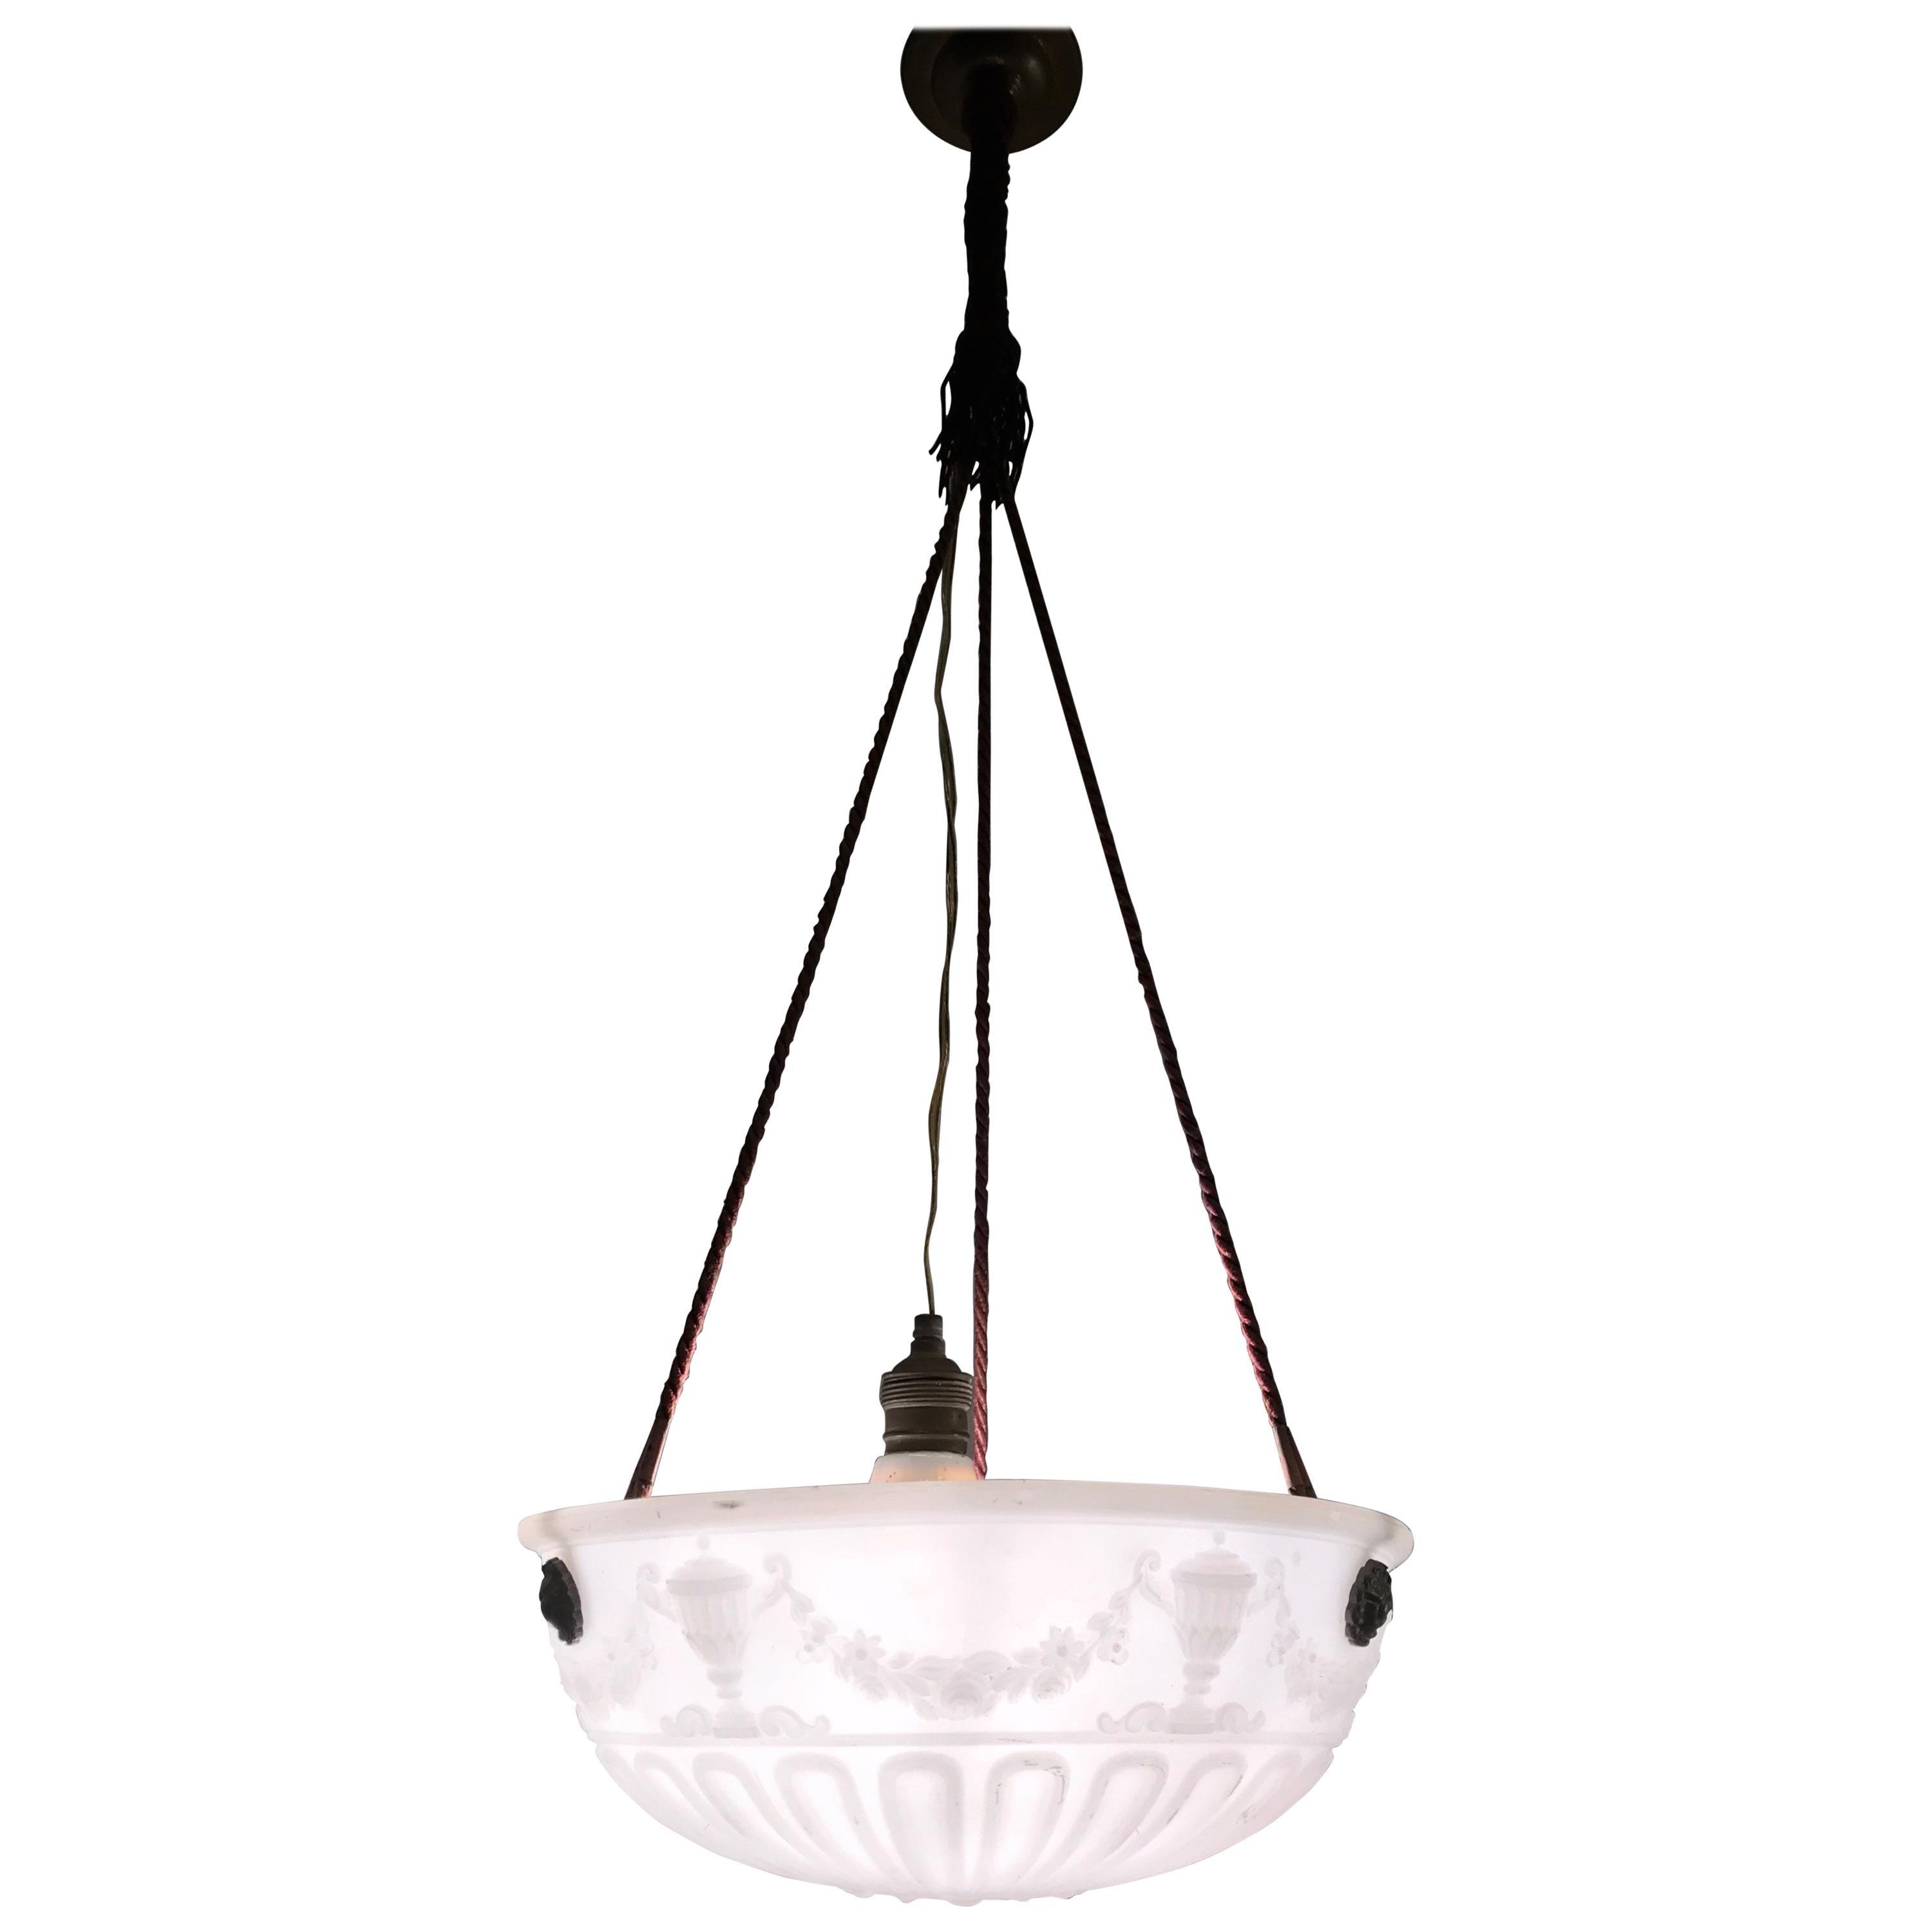 Striking Classical Design Press Glass with Original Rope Pendant / Light Fixture For Sale